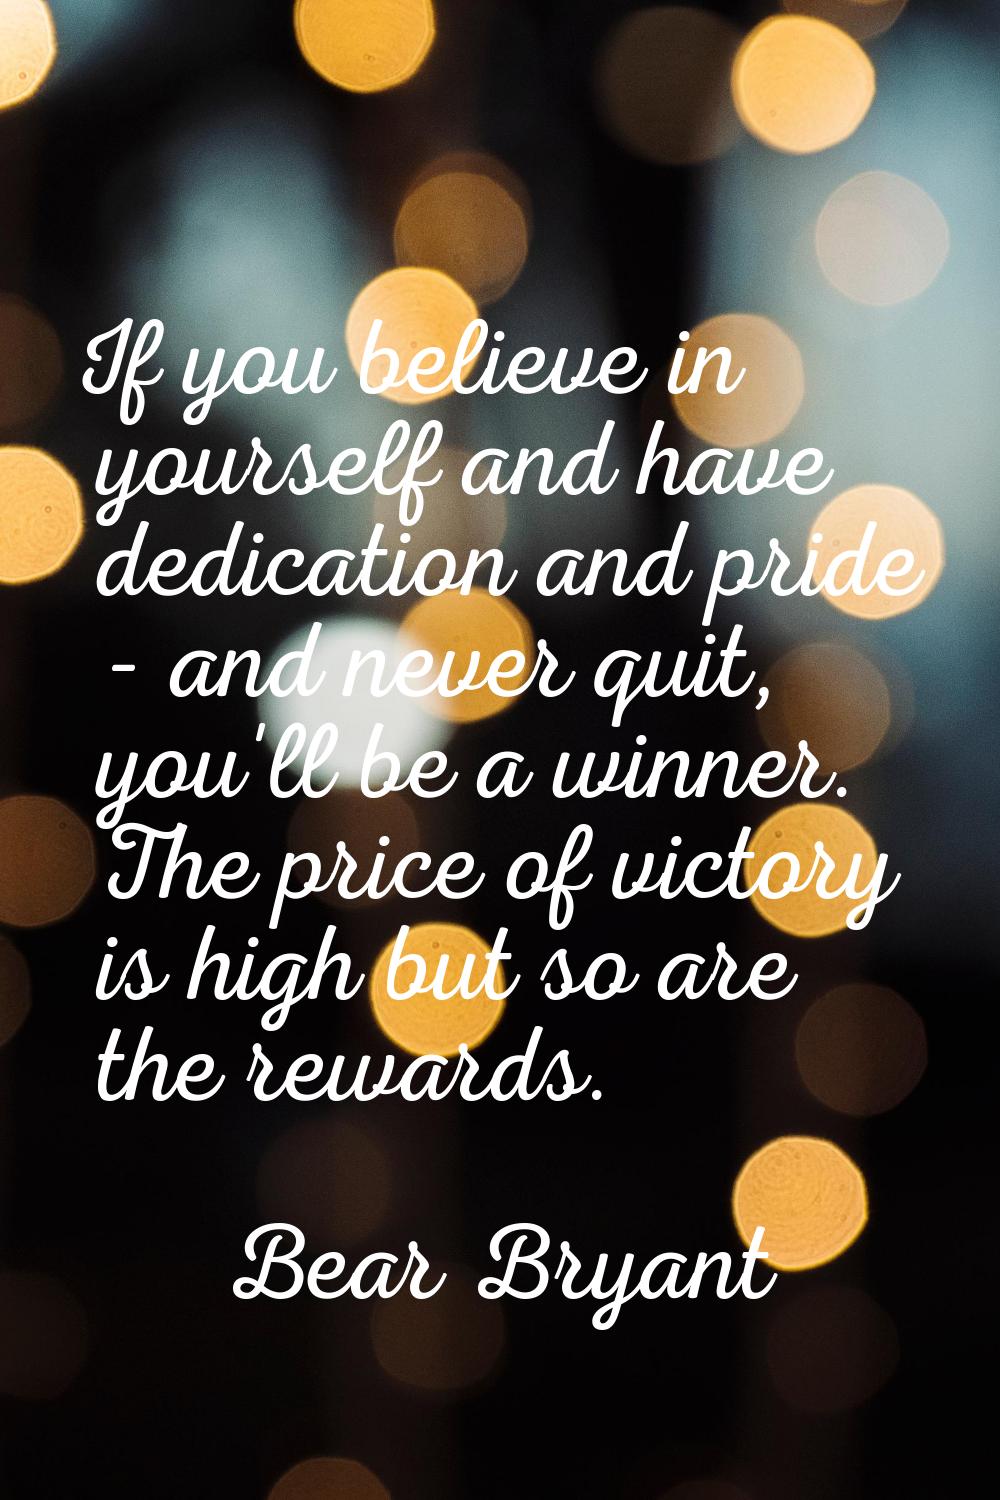 If you believe in yourself and have dedication and pride - and never quit, you'll be a winner. The 